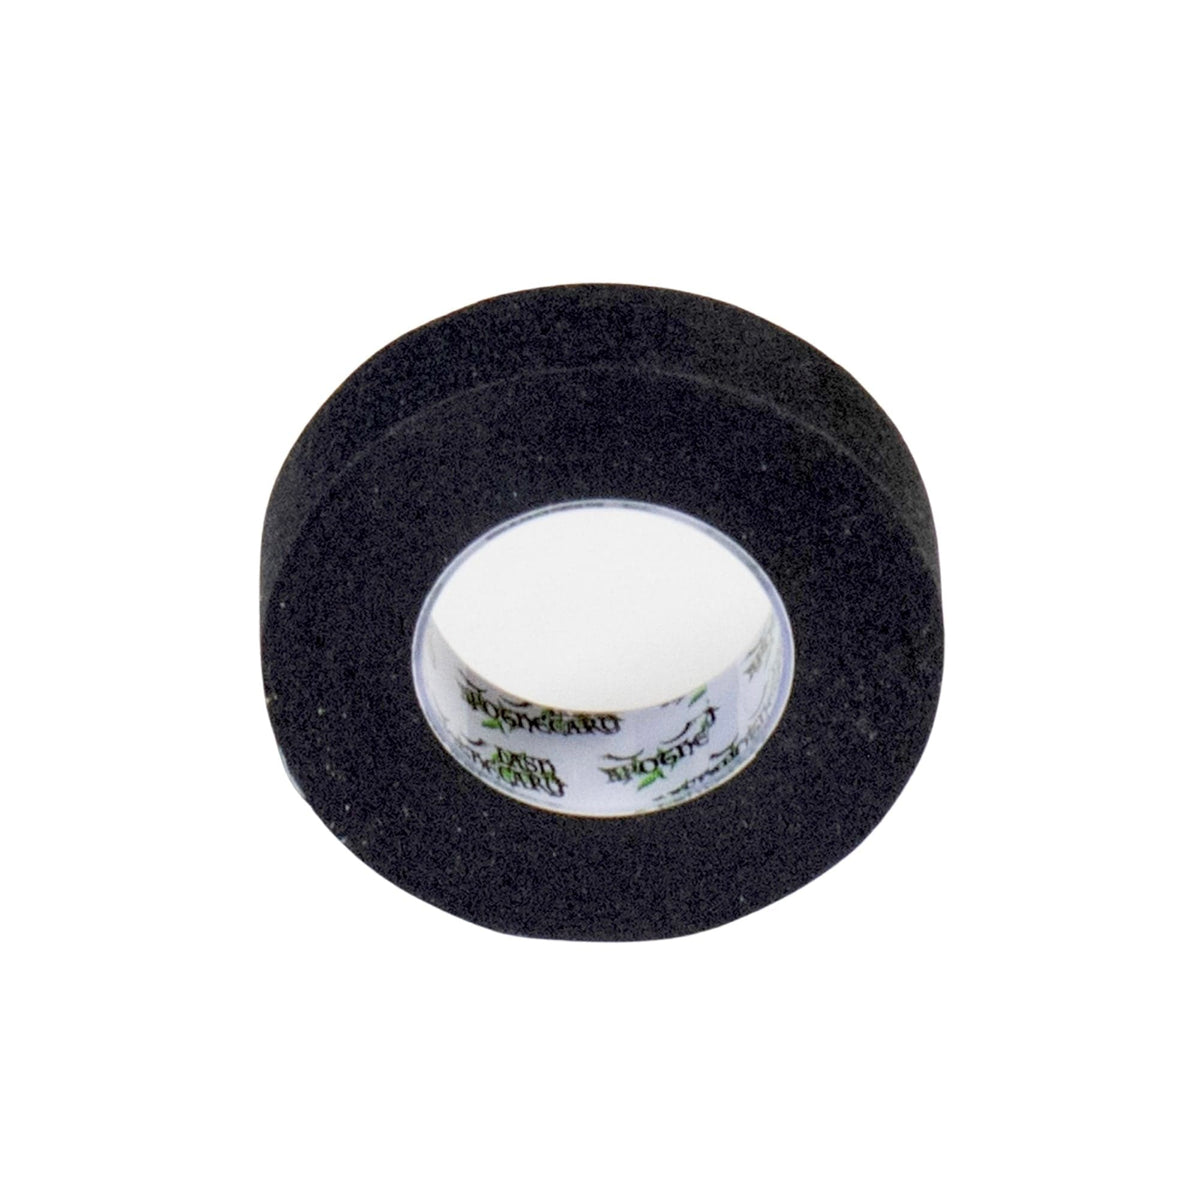 Double Sided Adhesive Foam Rounds - Small Circles